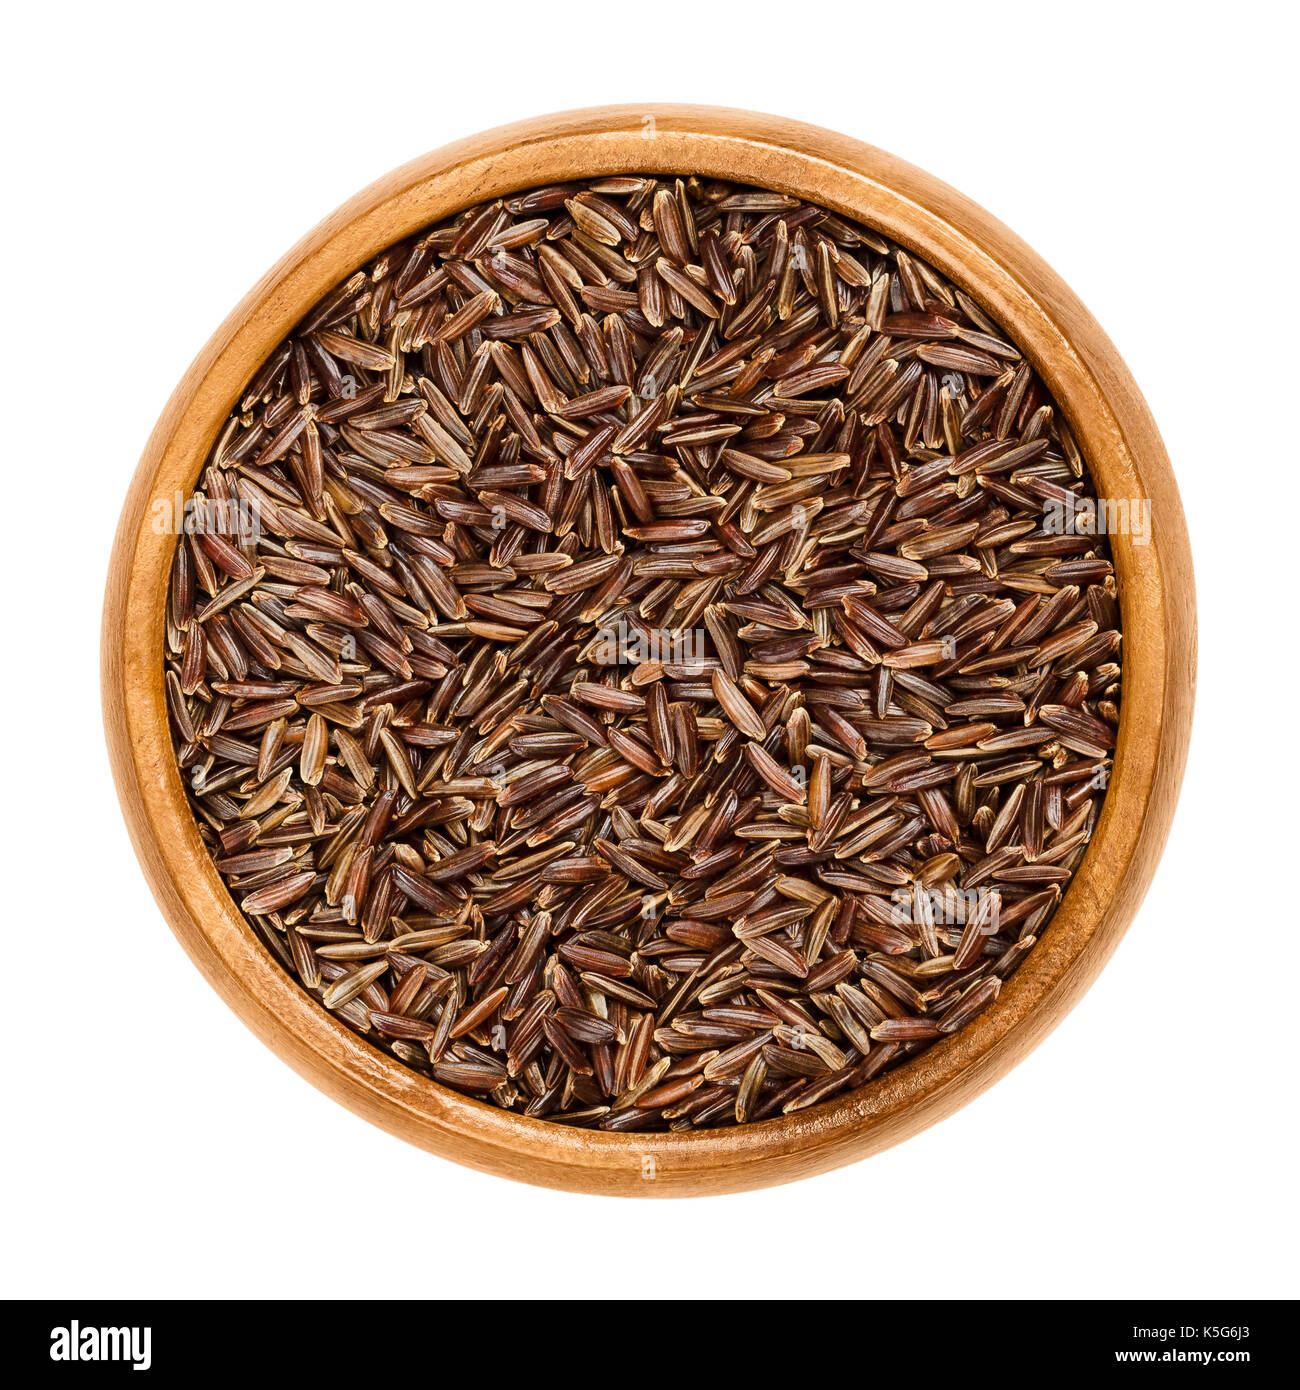 Camargue red rice in wooden bowl. Variety of red wild rice with brownish red colored grains, cultivated in southern France. Isolated macro food photo. Stock Photo